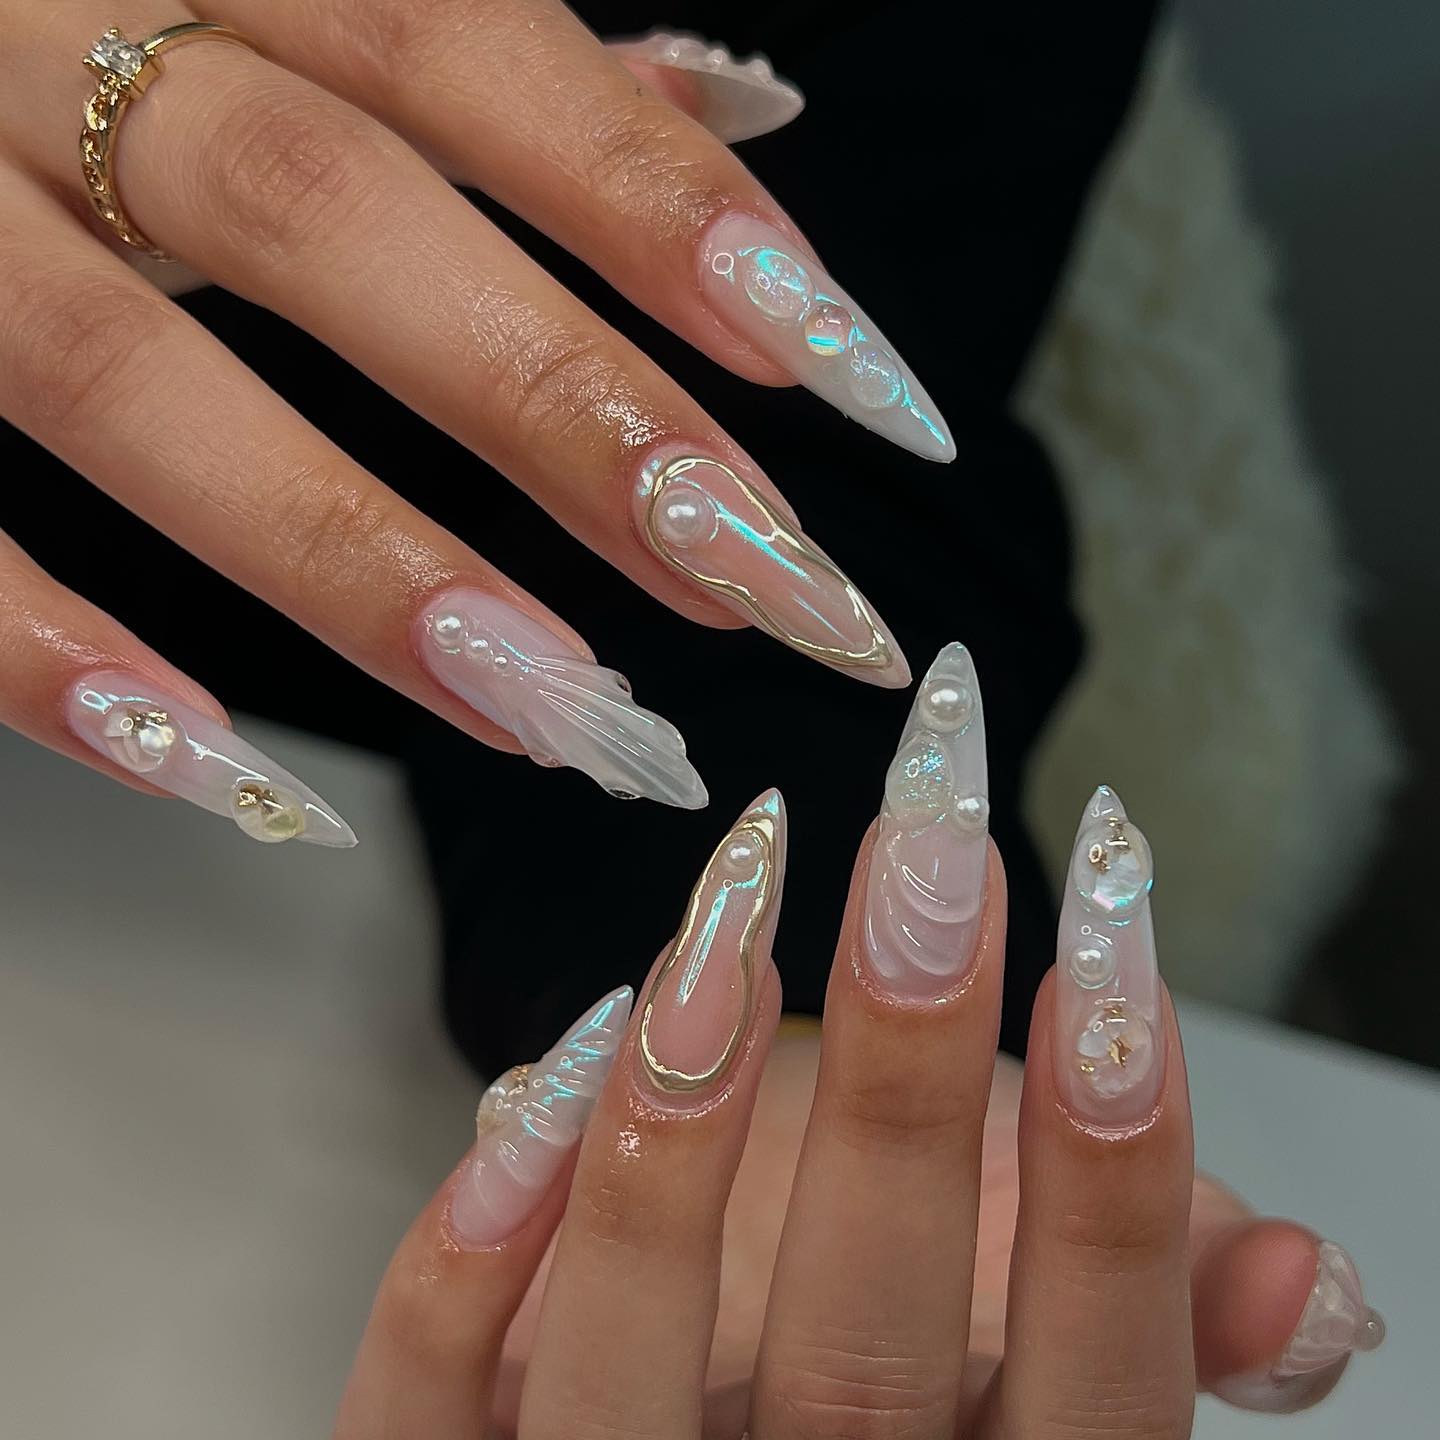 Mermaid-Inspired Manicures, You'll Want To Dive In and Try!